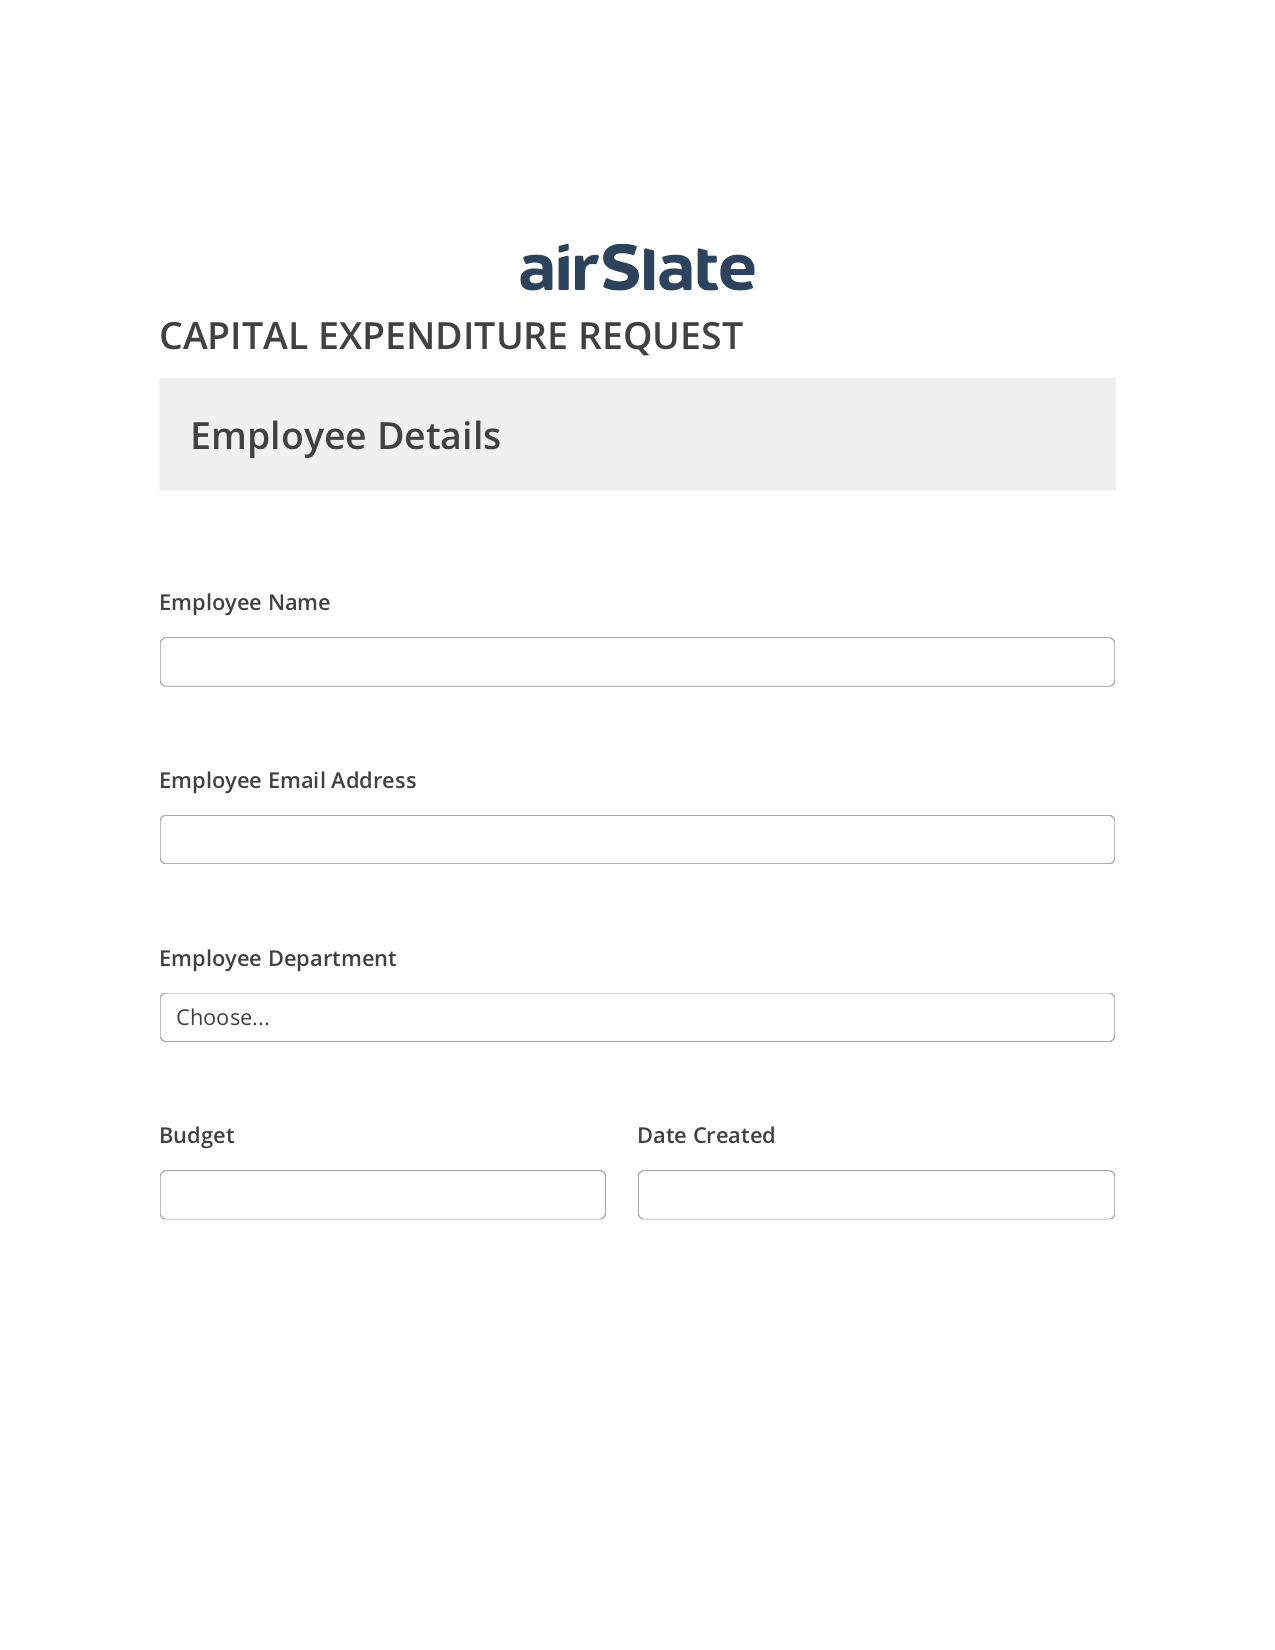 Capital Expenditure Request Approval Workflow System Bot - Slack Two-Way Binding Bot, Jira Bot, Archive to SharePoint Folder